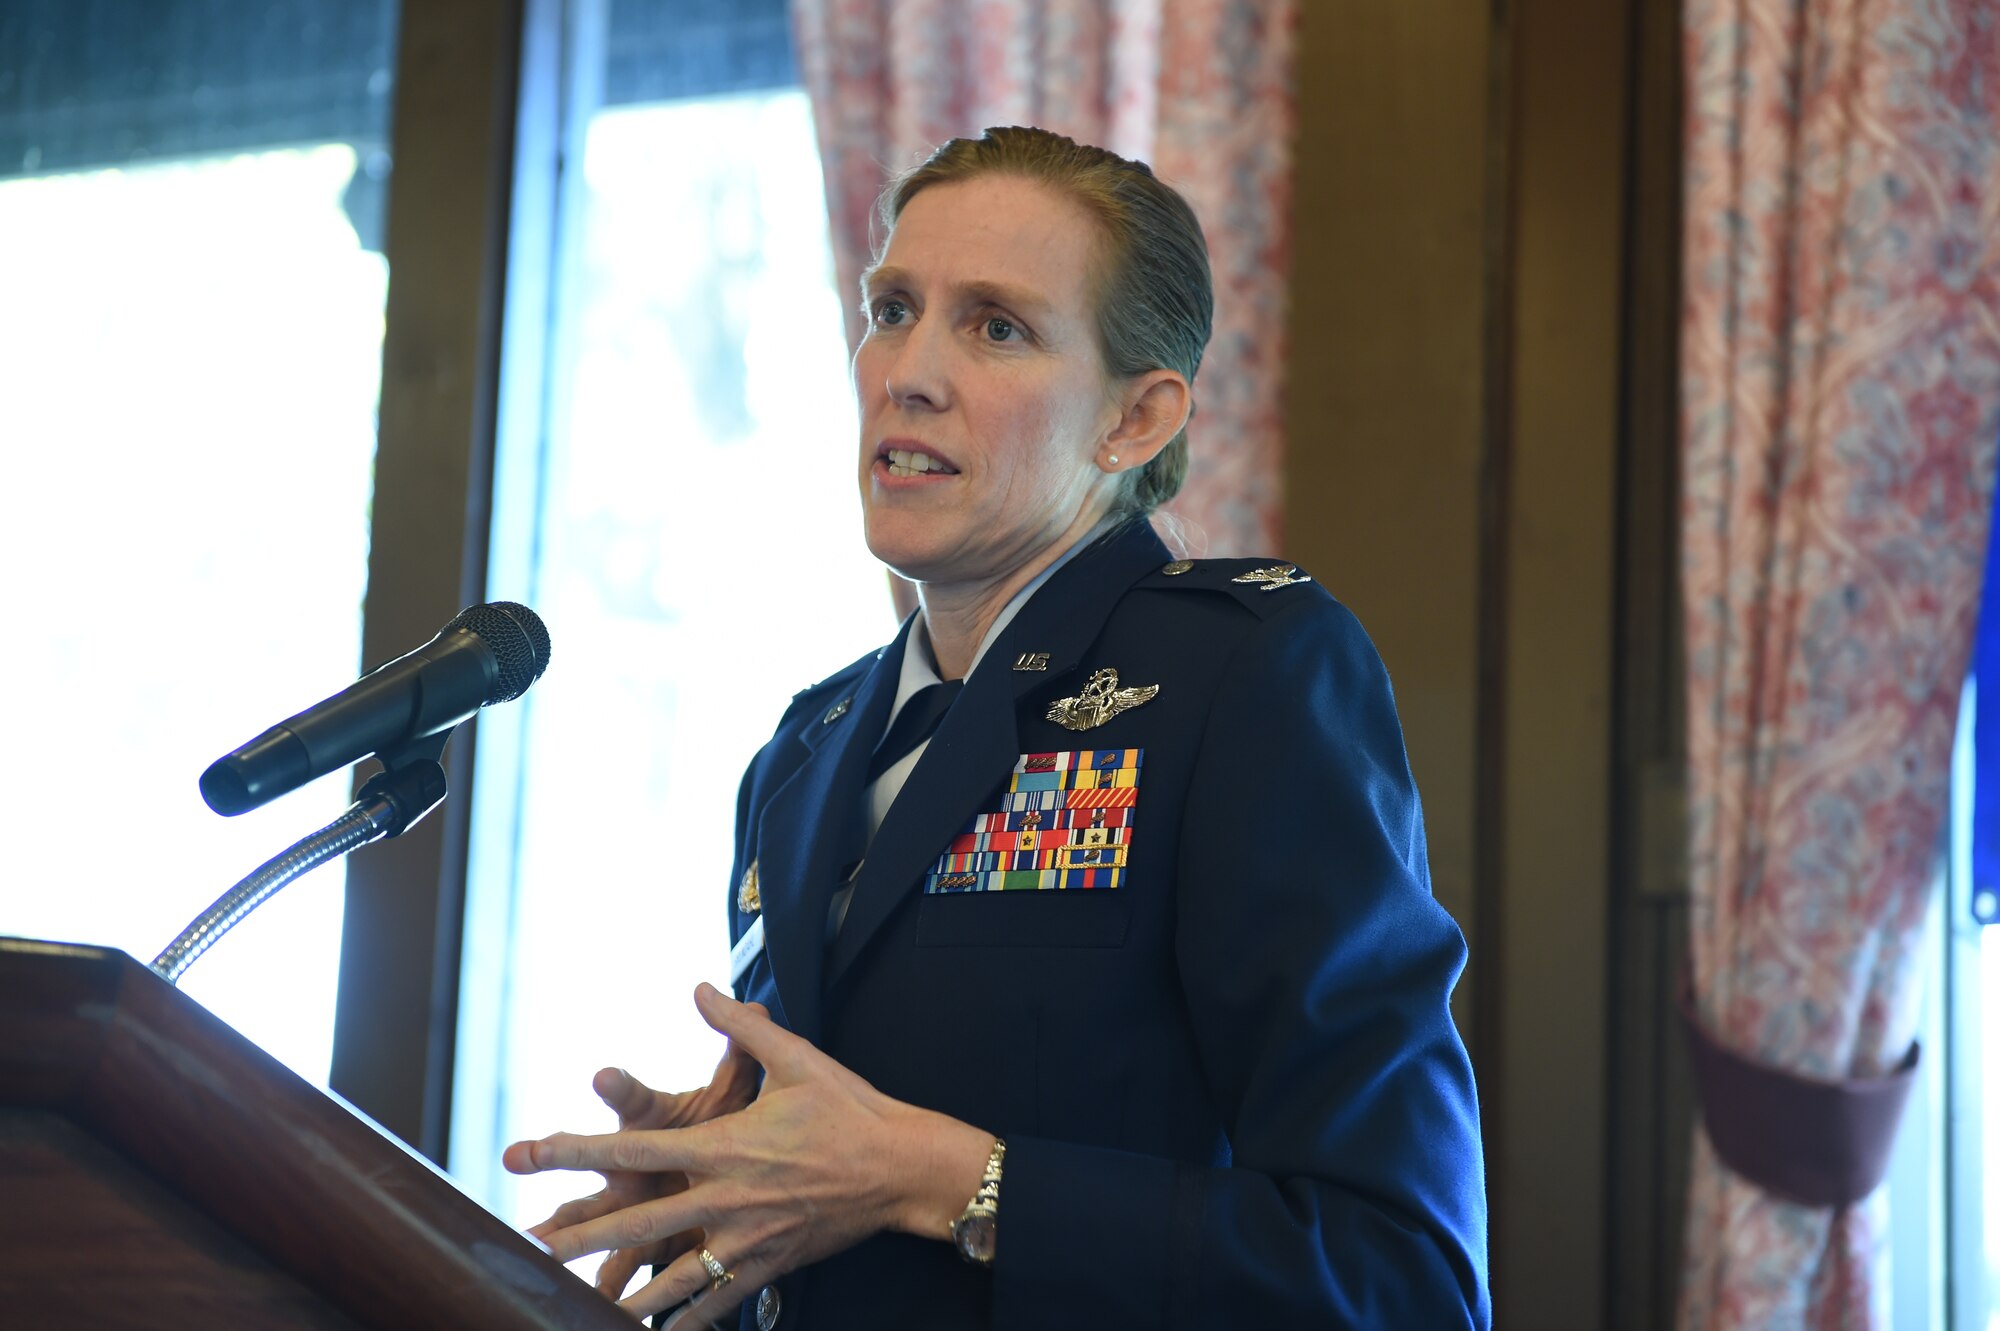 Col. Julie Grundahl, Joint Base Andrews/11th Wing vice commander gives remarks at the Veteran’s History Project reception at JBA, Md., Nov. 06, 2015. The project archives American veteran interviews speaking about the realities of war for future generations to research from. (U.S. Air Force photo/Senior Airman Joshua R. M. Dewberry)